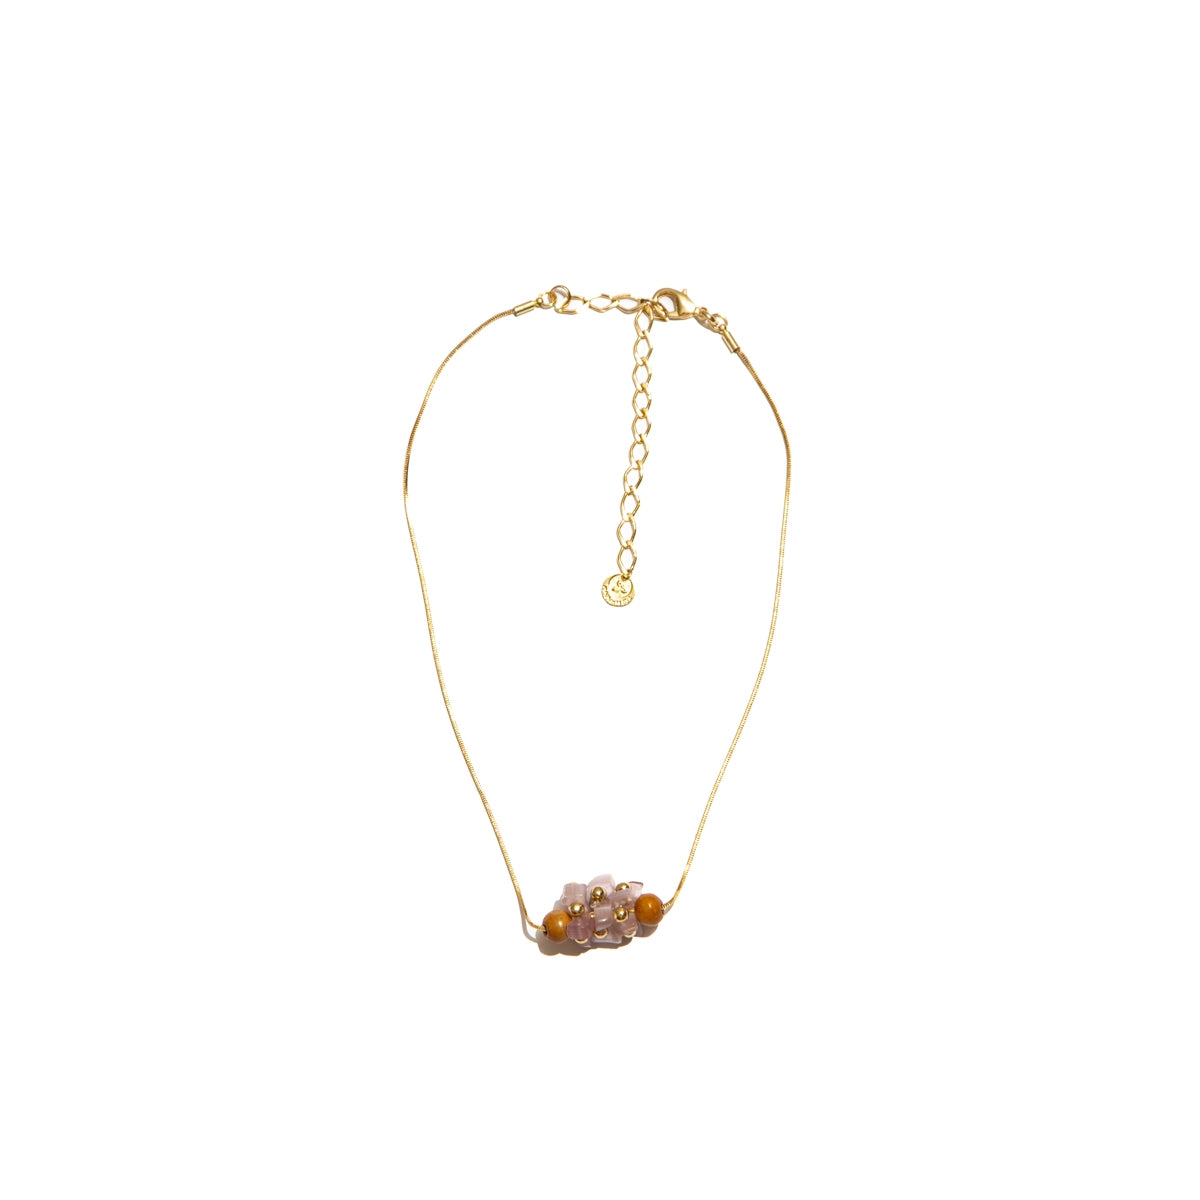 Natalia necklace with stones, wooden beads, and metals plated in gold